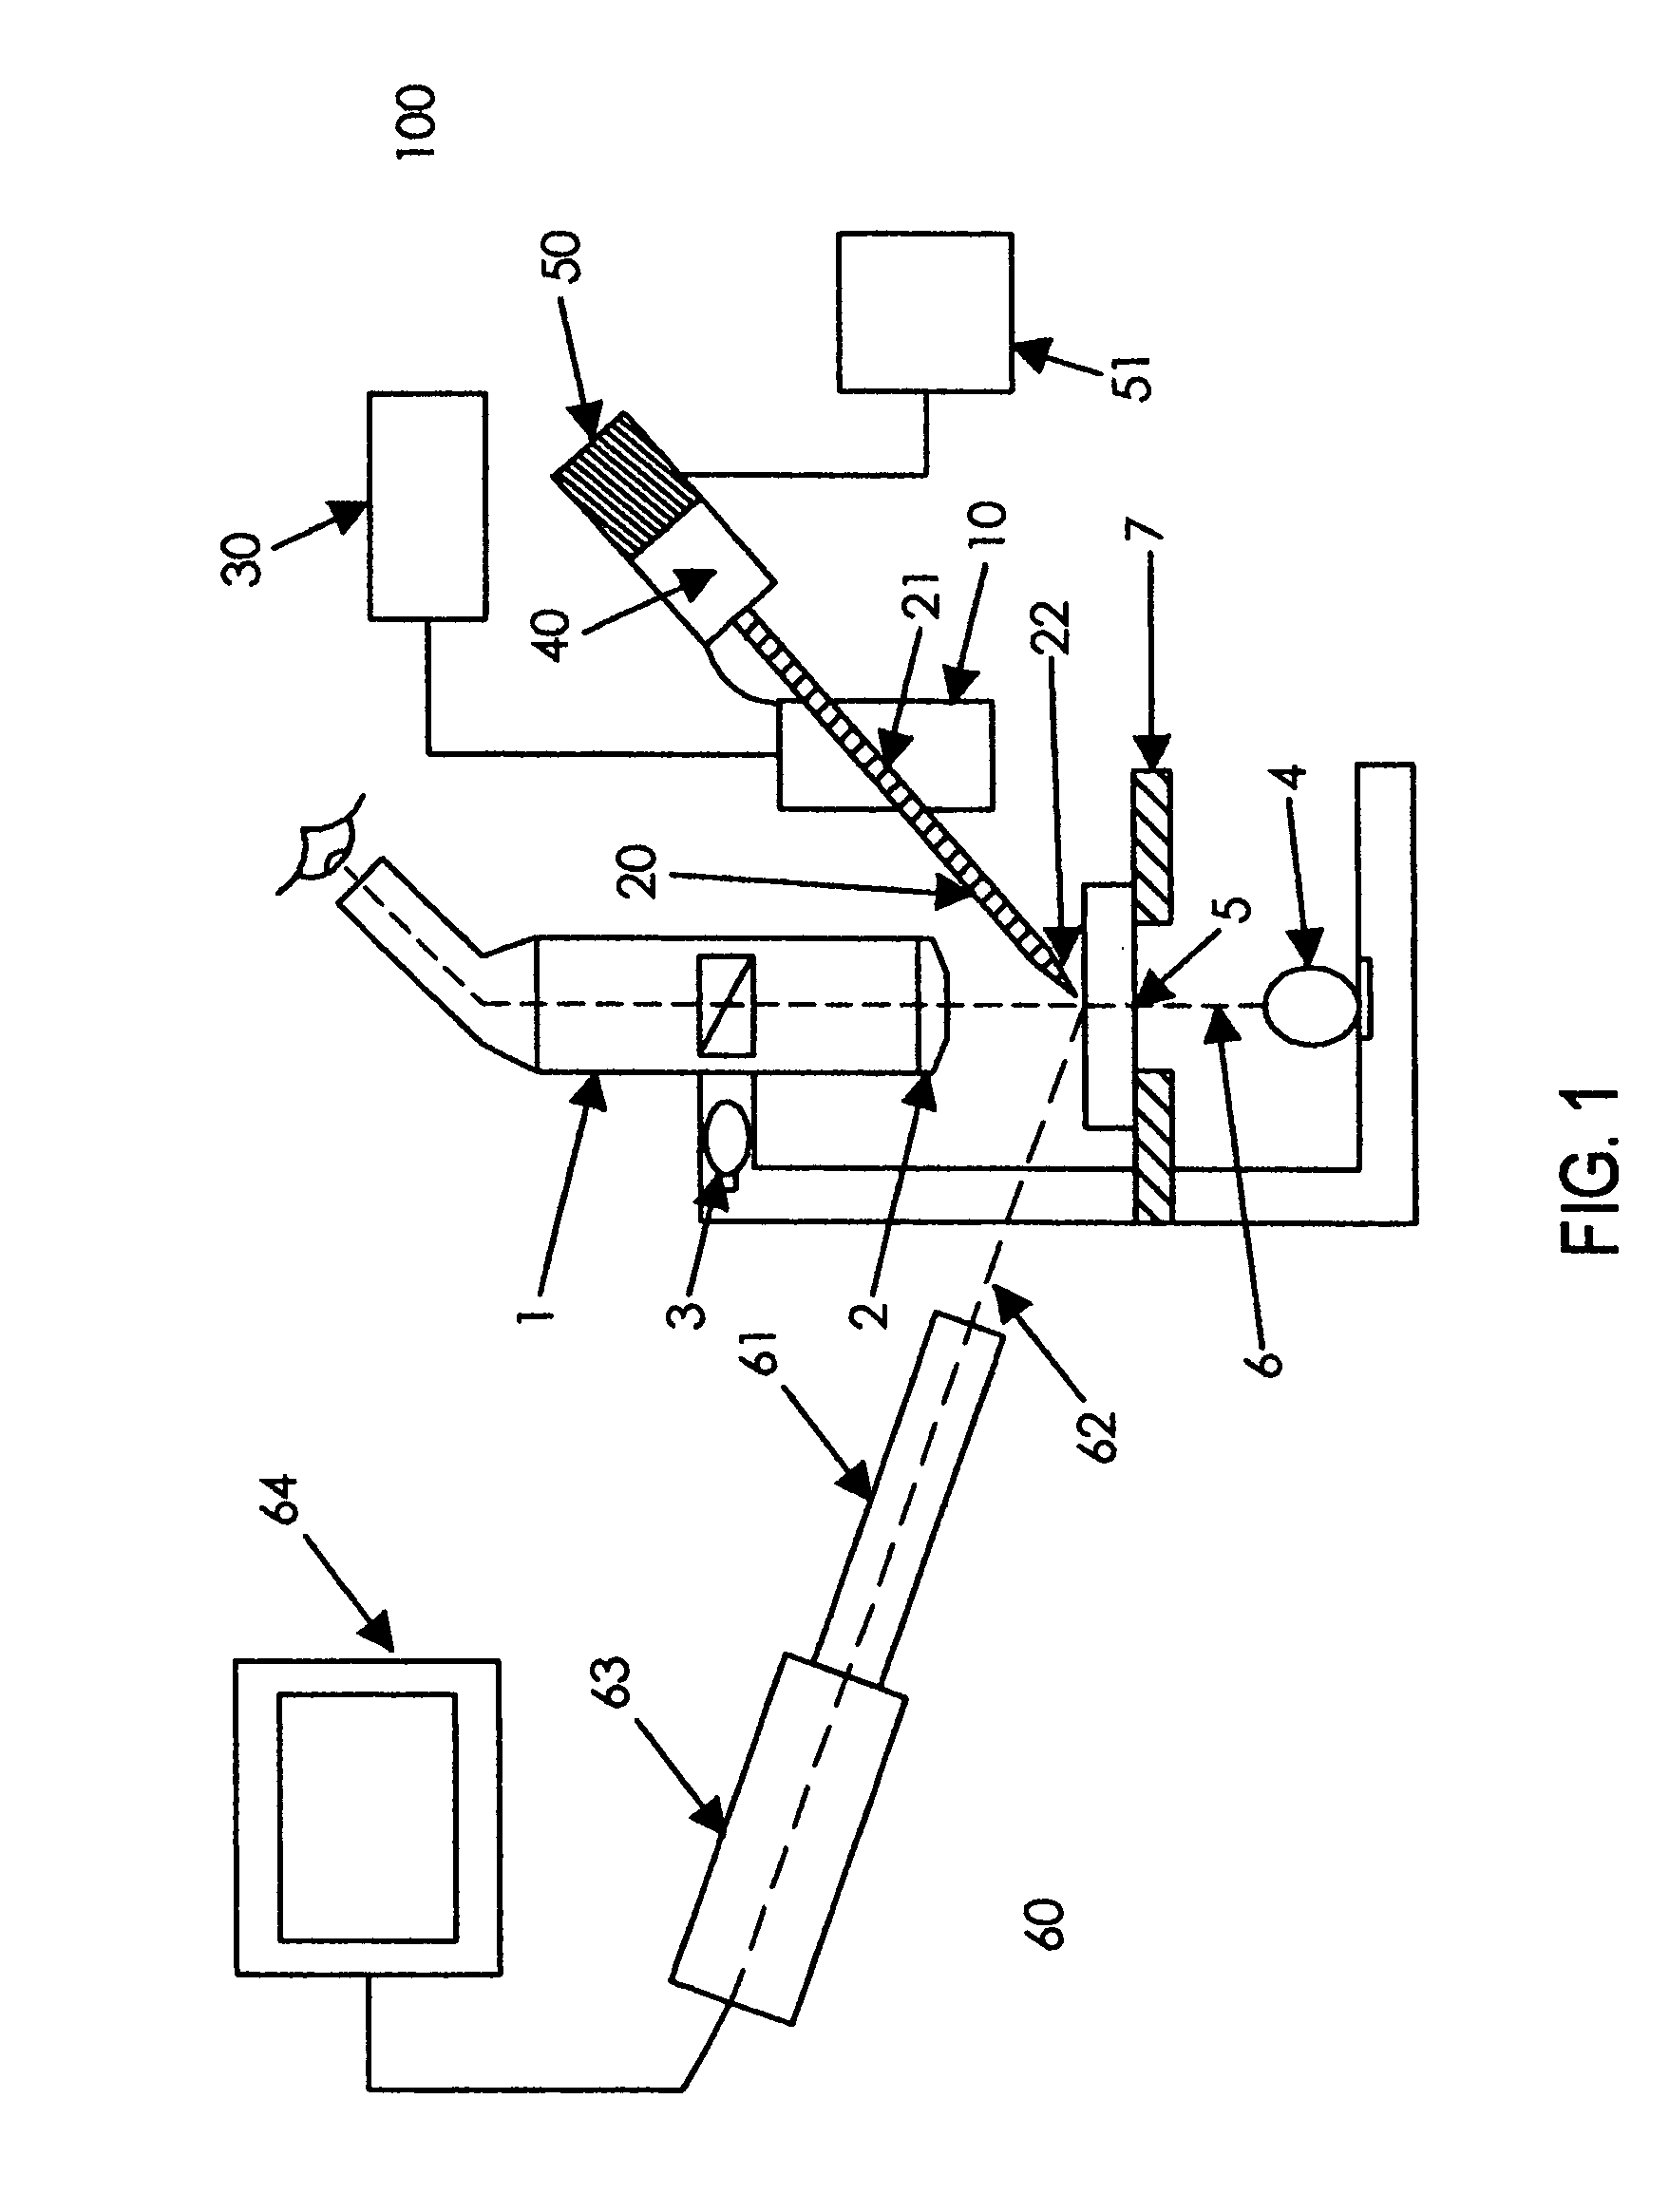 Microinjection assembly and methods for microinjecting and reimplanting avian eggs